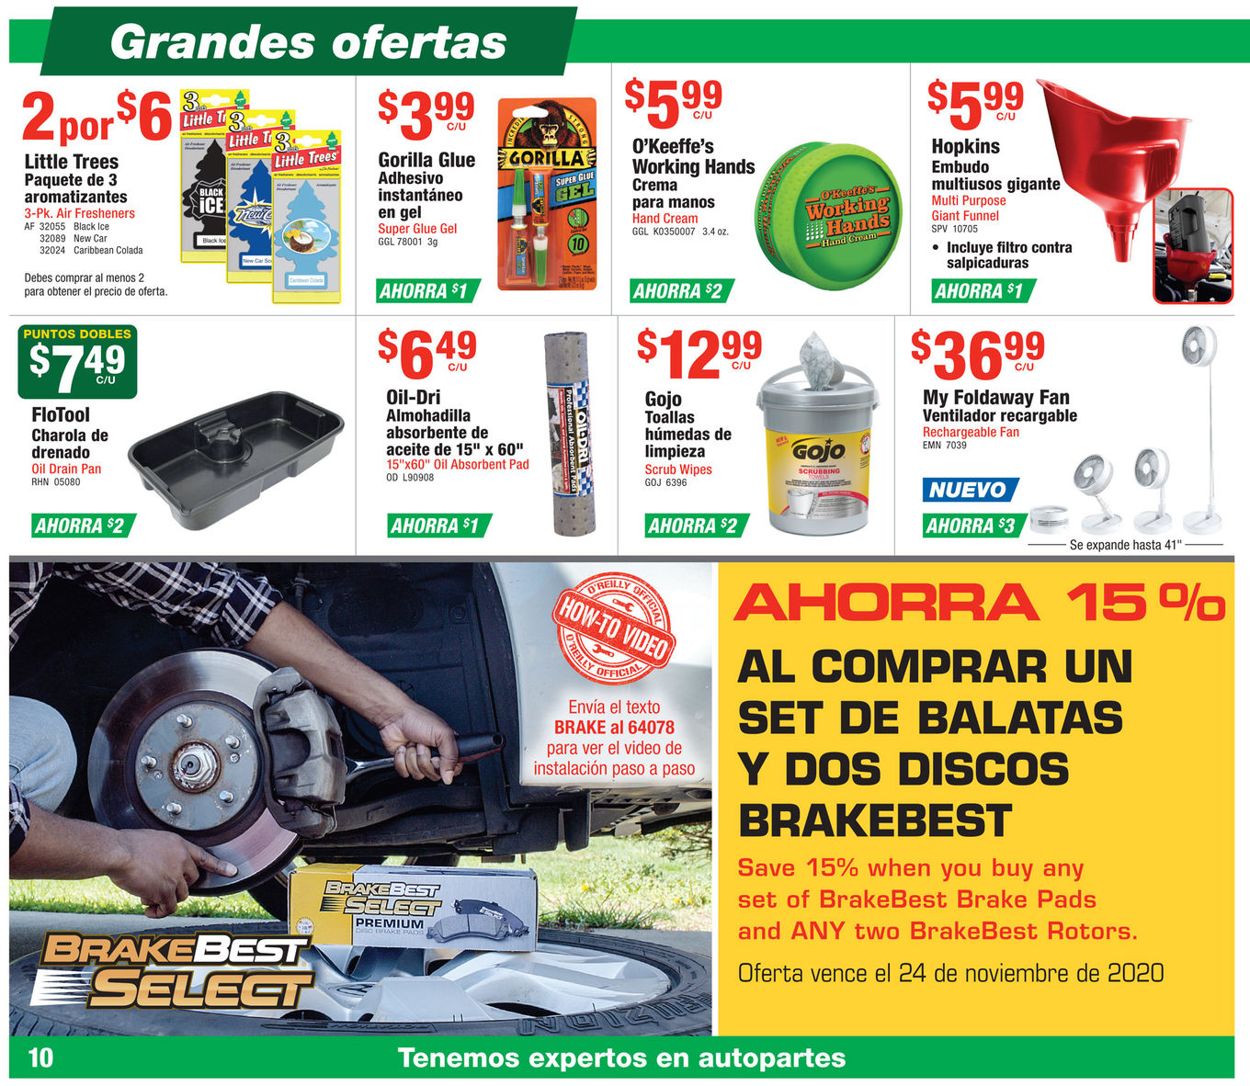 Catalogue O'Reilly Auto Parts from 10/28/2020